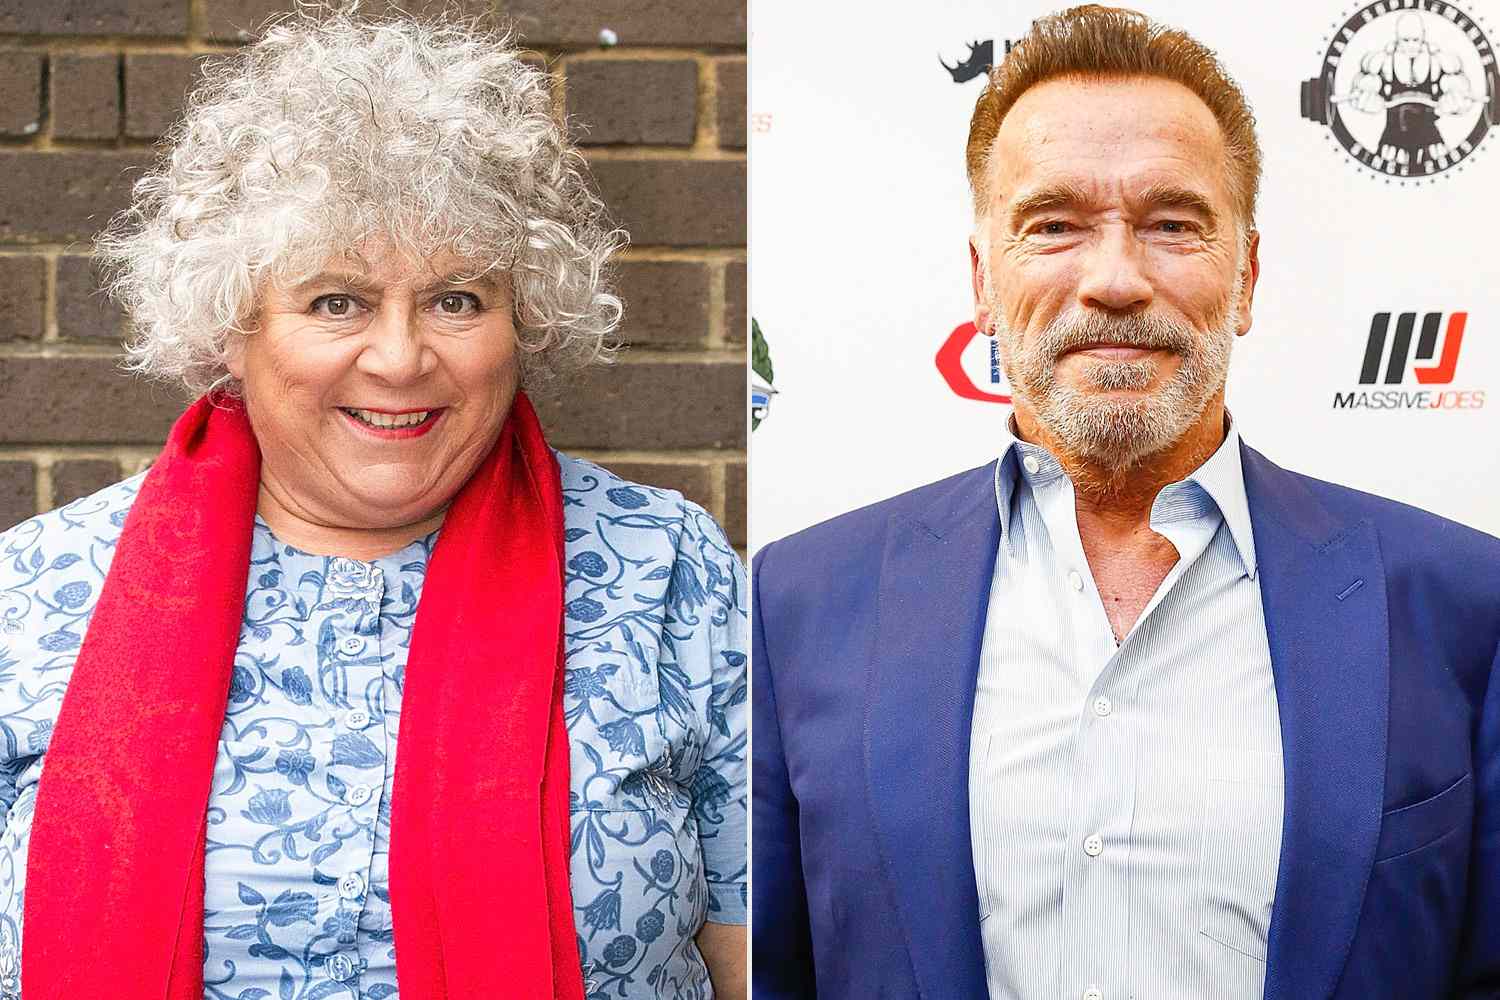 Miriam Margolyes is seen on September 03, 2013 in London, United Kingdom. (Photo by Simon Earl/Bauer-Griffin/GC Images); Arnold Schwarzenegger speaks during a press conference on March 15, 2019 in Melbourne, Australia. (Photo by Sam Tabone/WireImage)